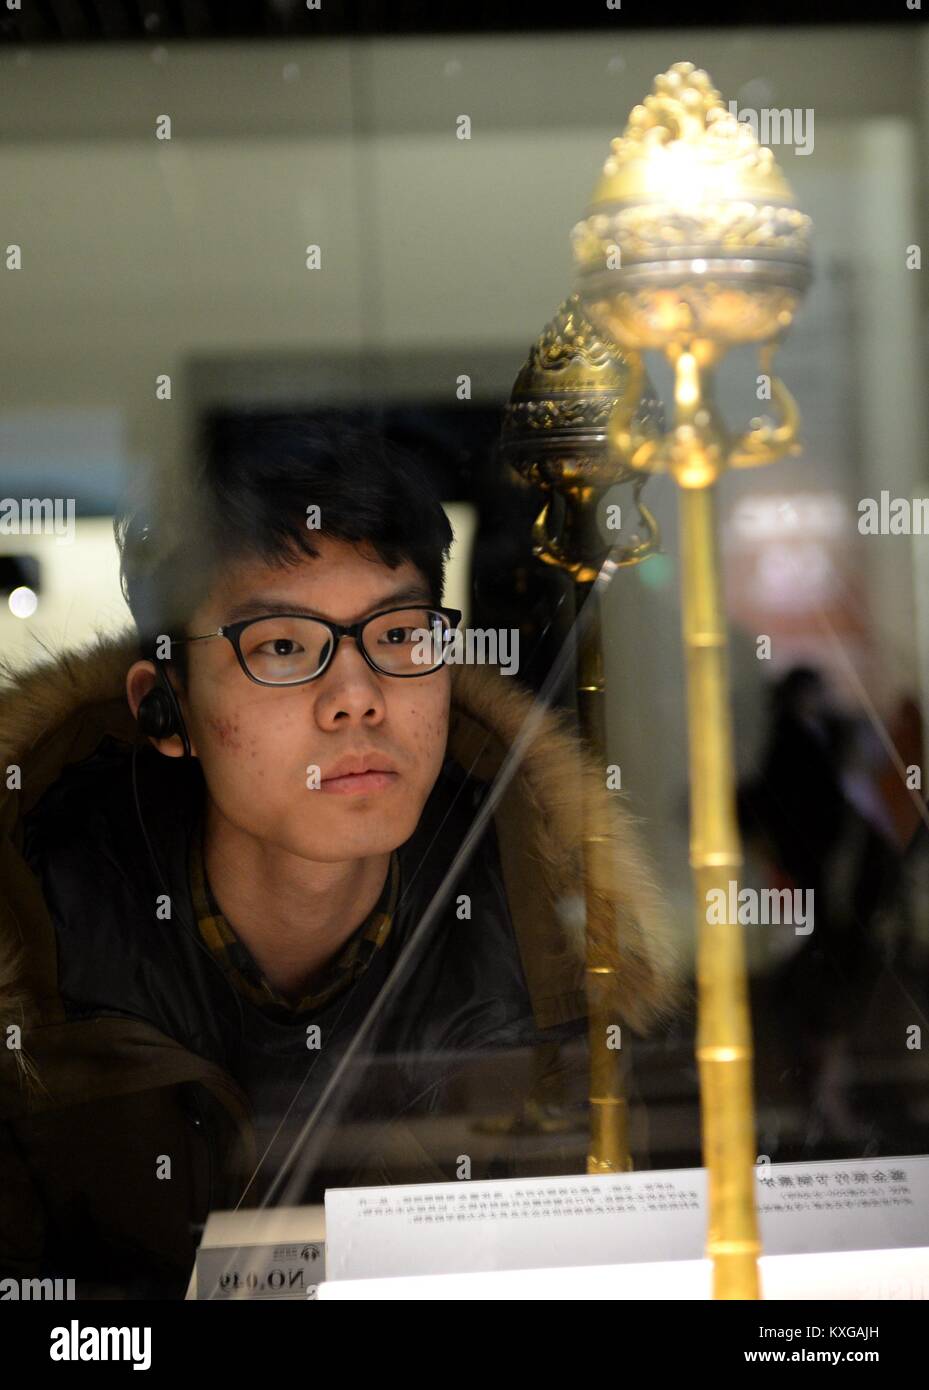 Xi'an, China's Shaanxi Province. 9th Jan, 2018. A visitor views exhibits displayed during an exhibition on cultural relics of ancient Chinese dynasties at Shaanxi History Museum in Xi'an, capital of northwest China's Shaanxi Province, Jan. 9, 2018. More than 600 cultural relics of four dynasties including Zhou (1046 B.C. - 256 B.C.), Qin (221 B.C. - 206 B.C.), Han (206 B.C.- 220 A.D.) and Tang (618-907) were displayed during the exhibition. Credit: Li Yibo/Xinhua/Alamy Live News Stock Photo